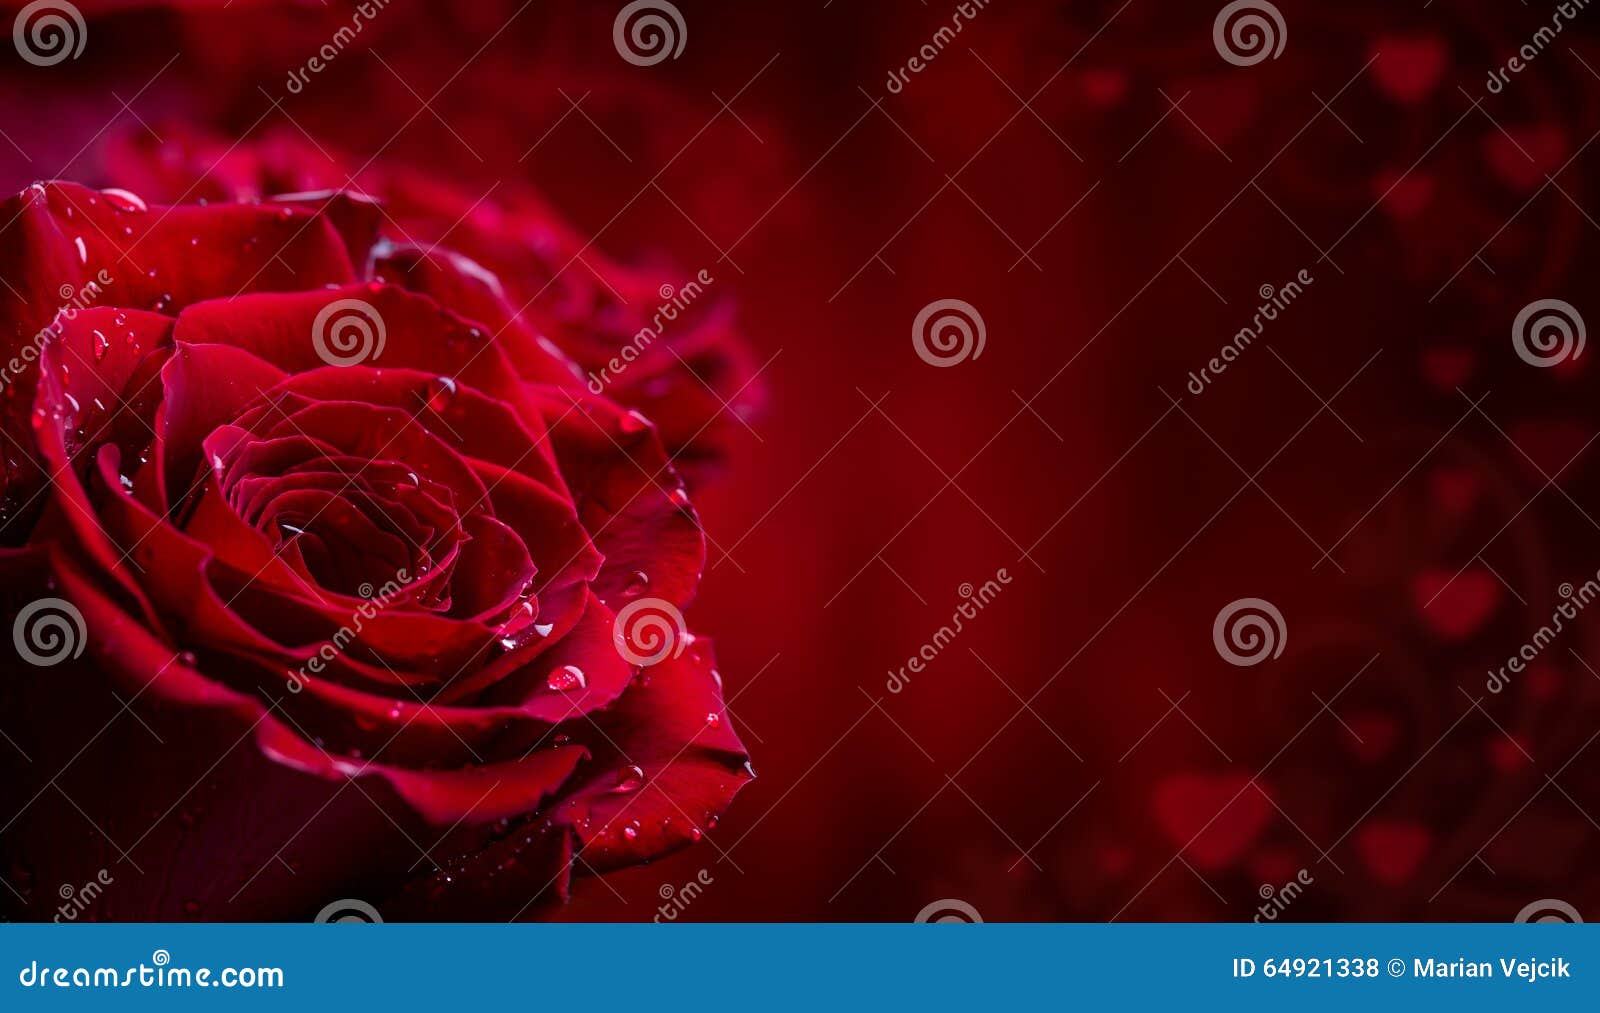 rose. red roses. bouquet of red roses. several roses on granite background. valentines day, wedding day background.